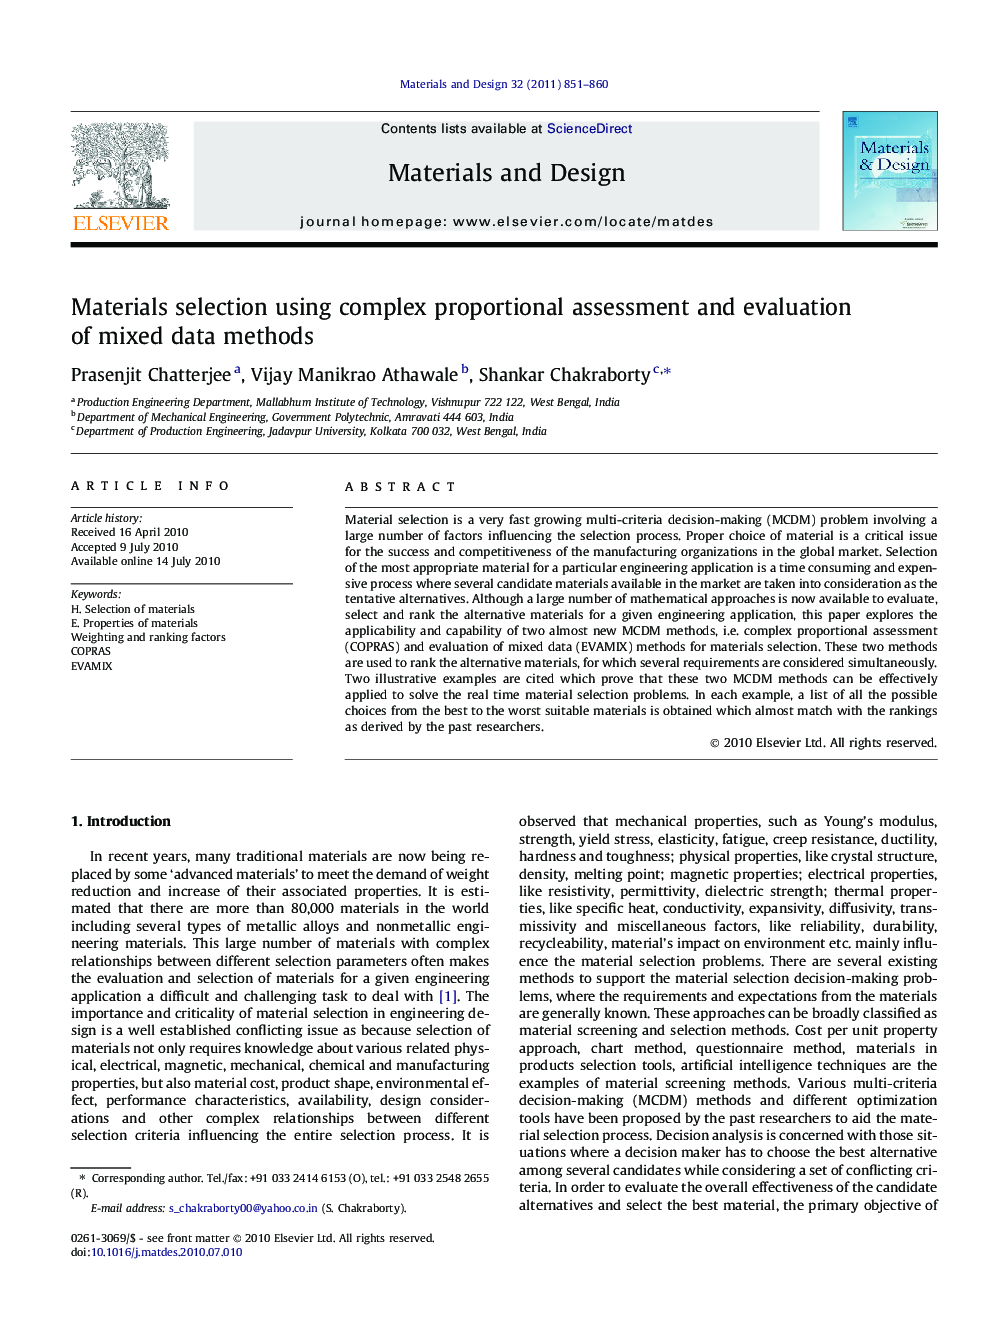 Materials selection using complex proportional assessment and evaluation of mixed data methods